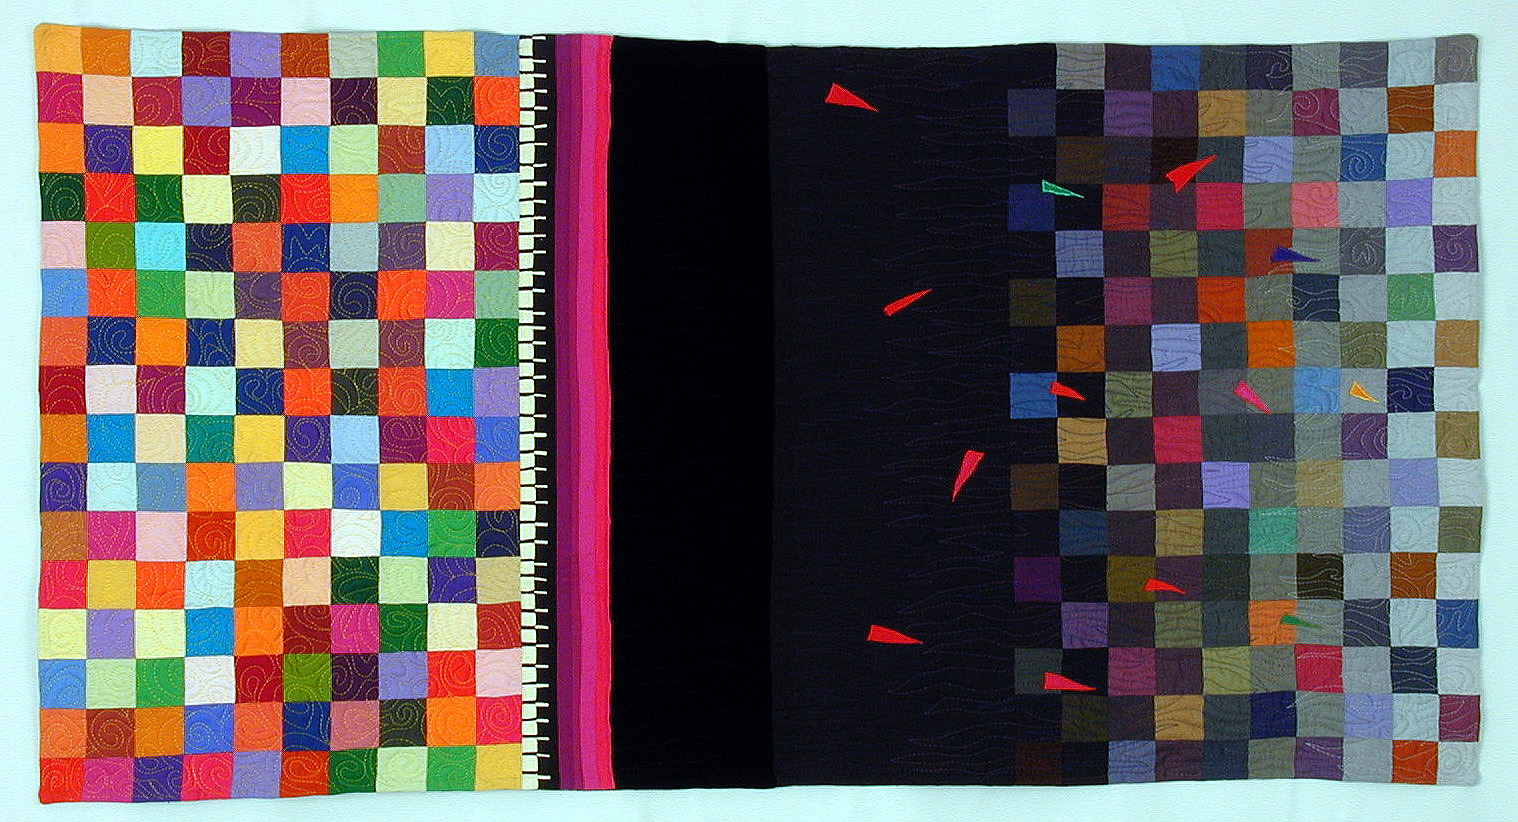 Photo of a quilt, rectangular and landscape format. At left many bright squares create a colorful random gridwork. At the right edge of this area, toward the center of the quilt, several narrow vertical lines separate the colored squares from a very black area which covers about the middle third. In that area, mostly to the right side are some long skinny triangles randomly placed. At the right side, colored squares appear again, but dark and of muted colors, they seem to emerge from the middle darkness.